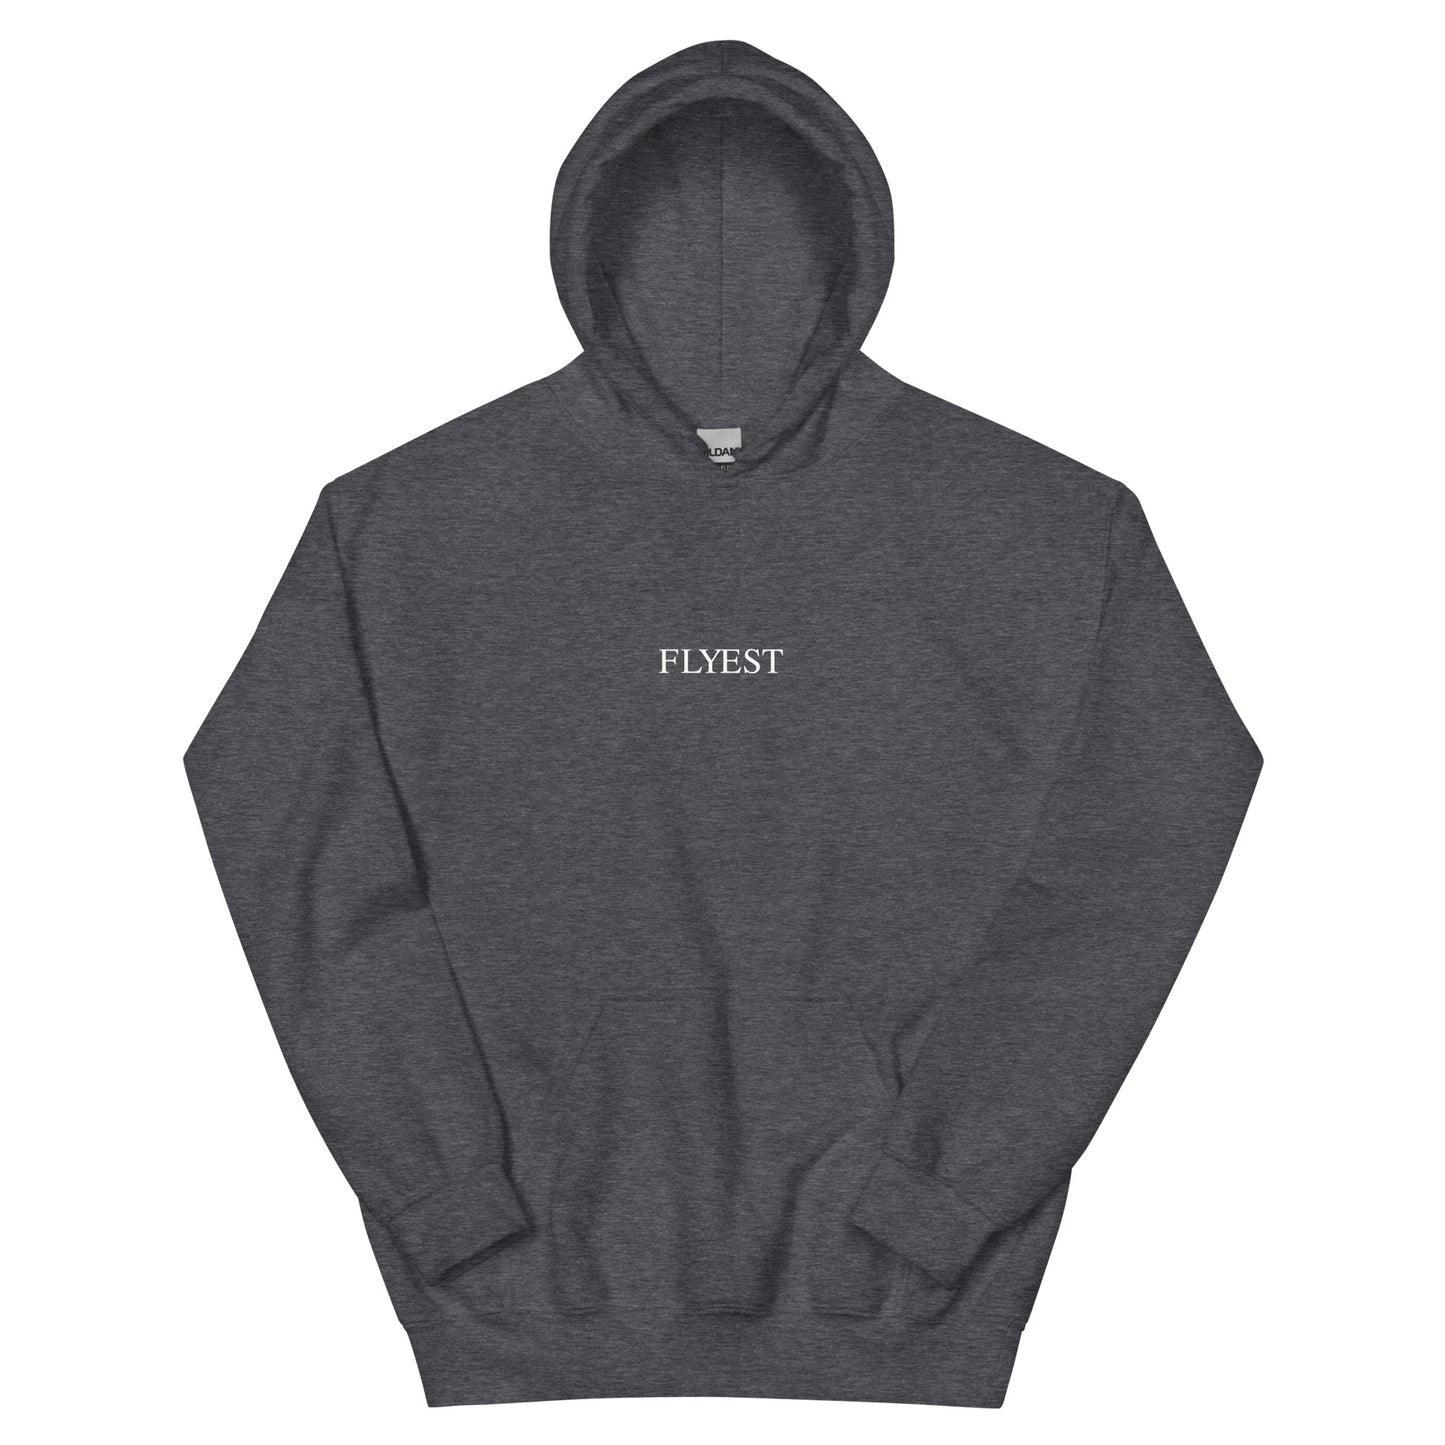 Flyest Large but Unseen hoodie